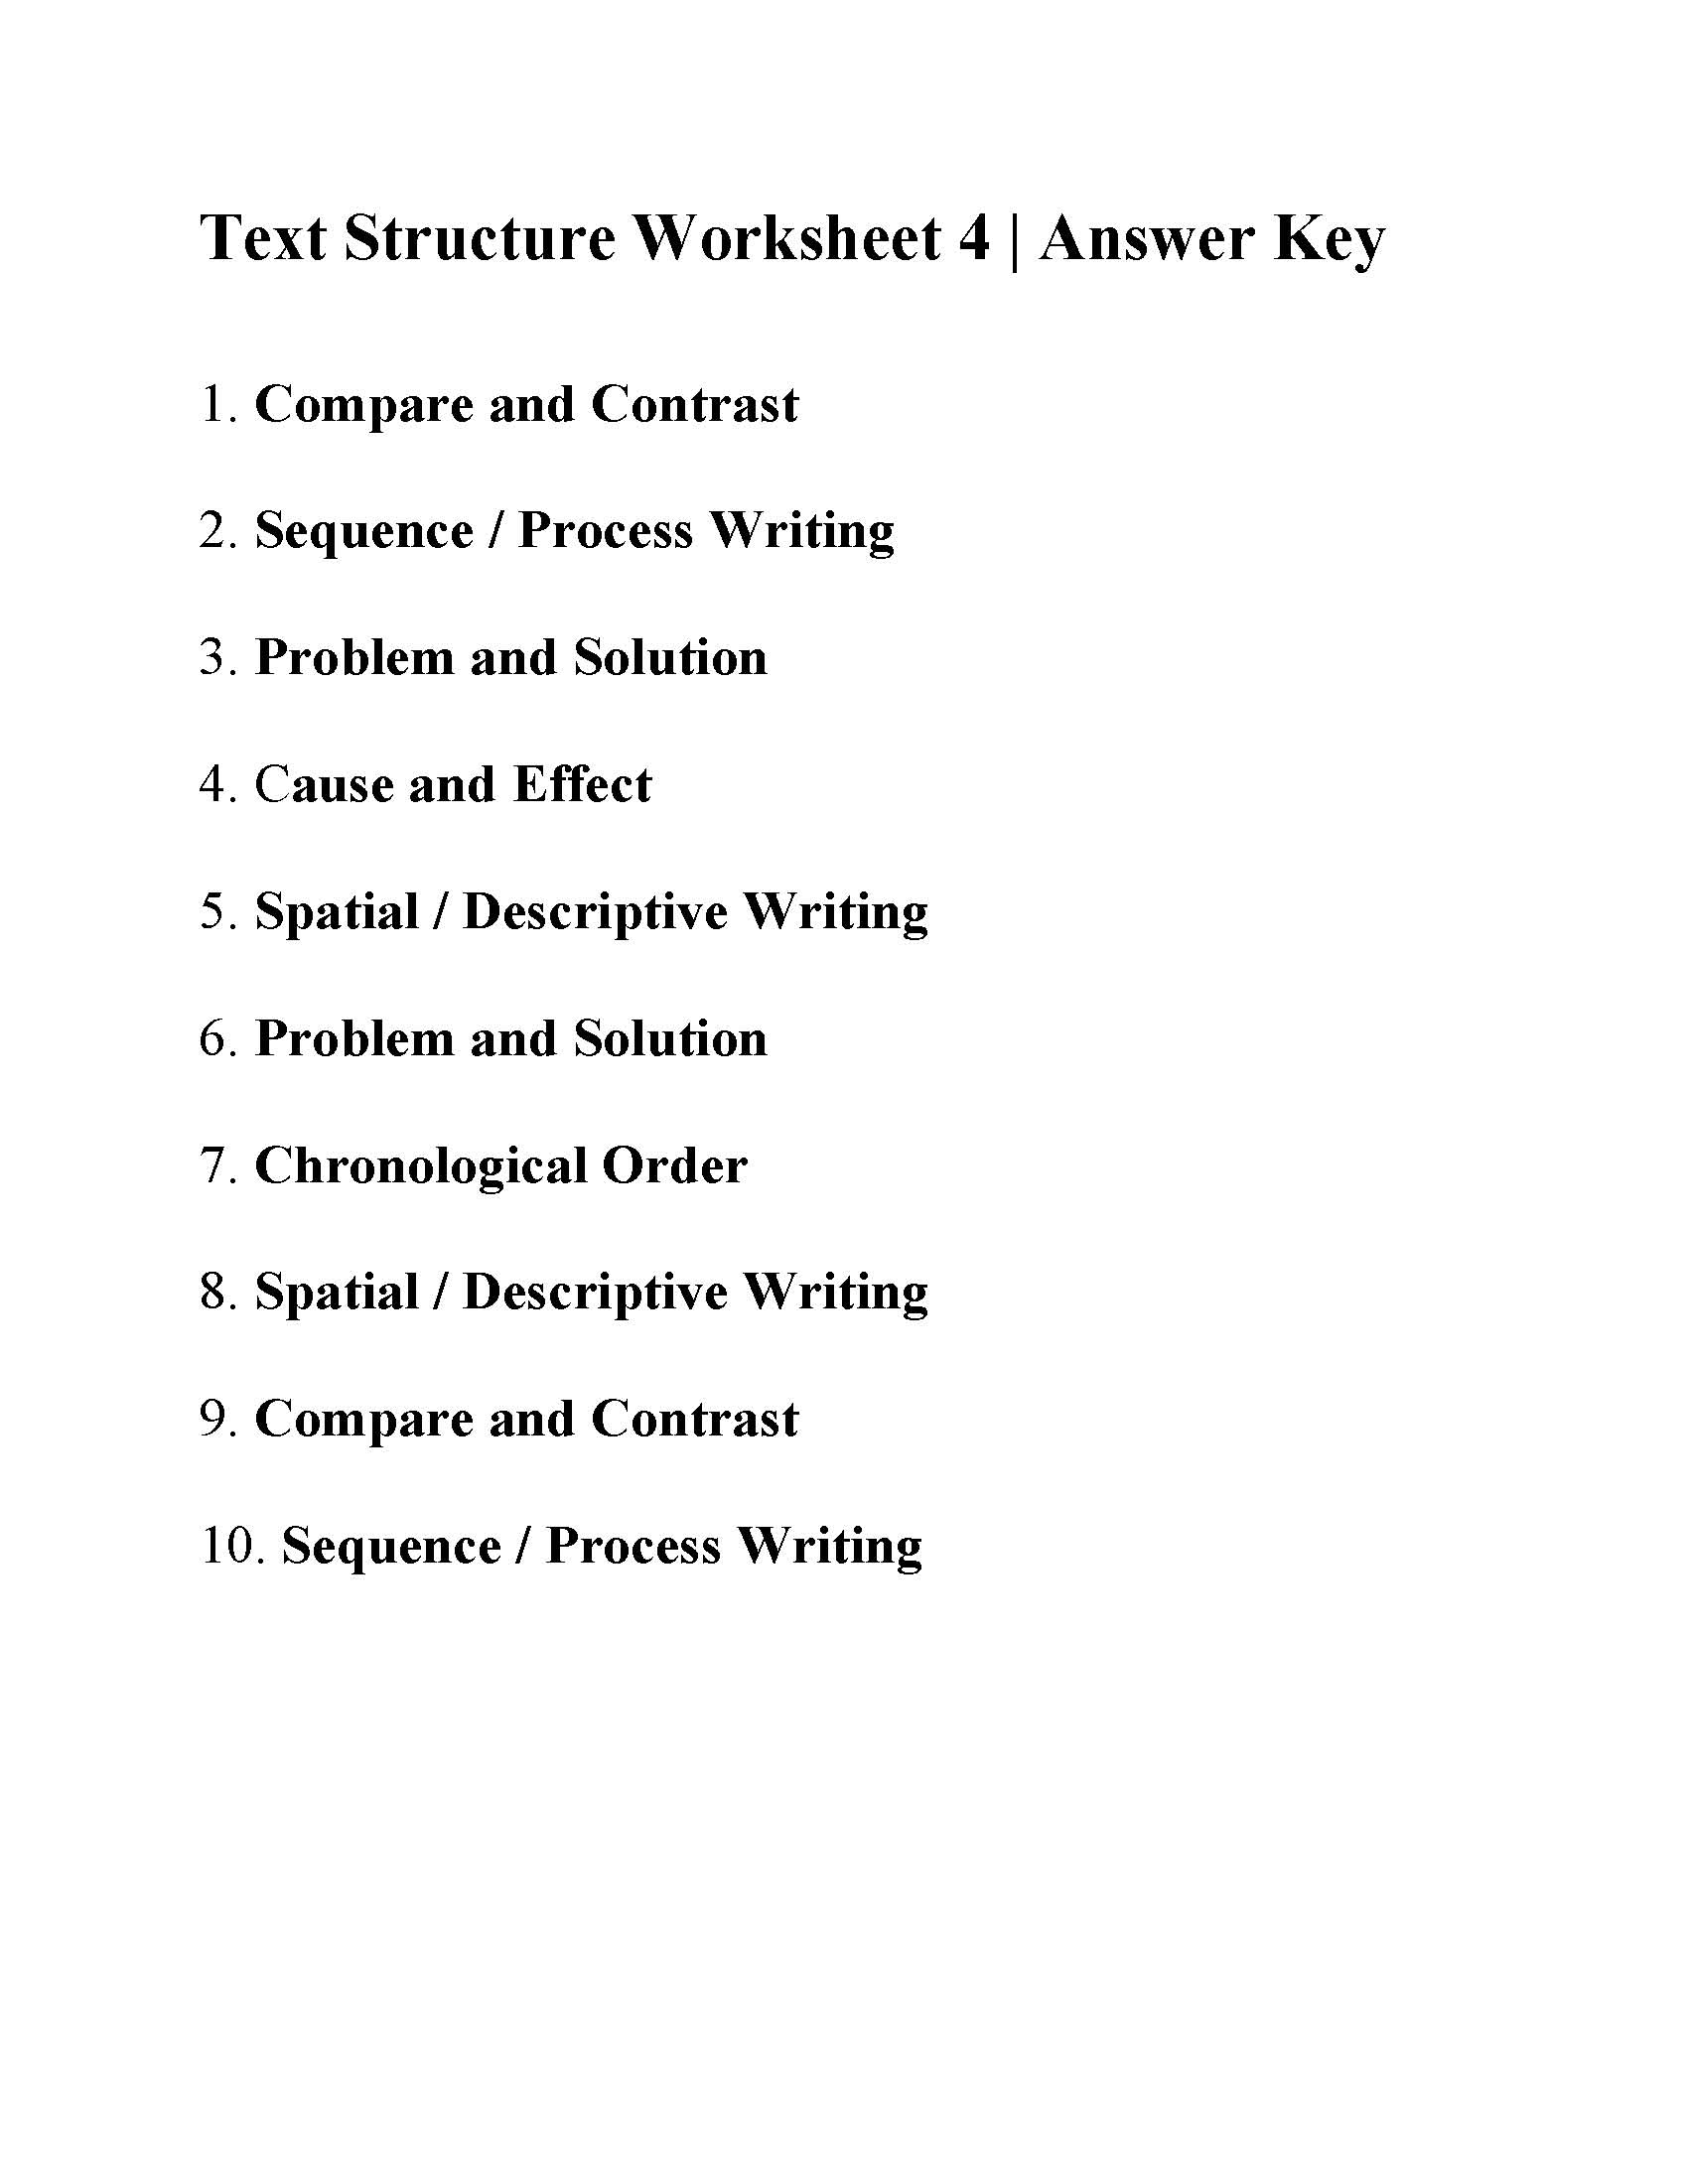 This is the answer key for the Text Structure Worksheet 4.